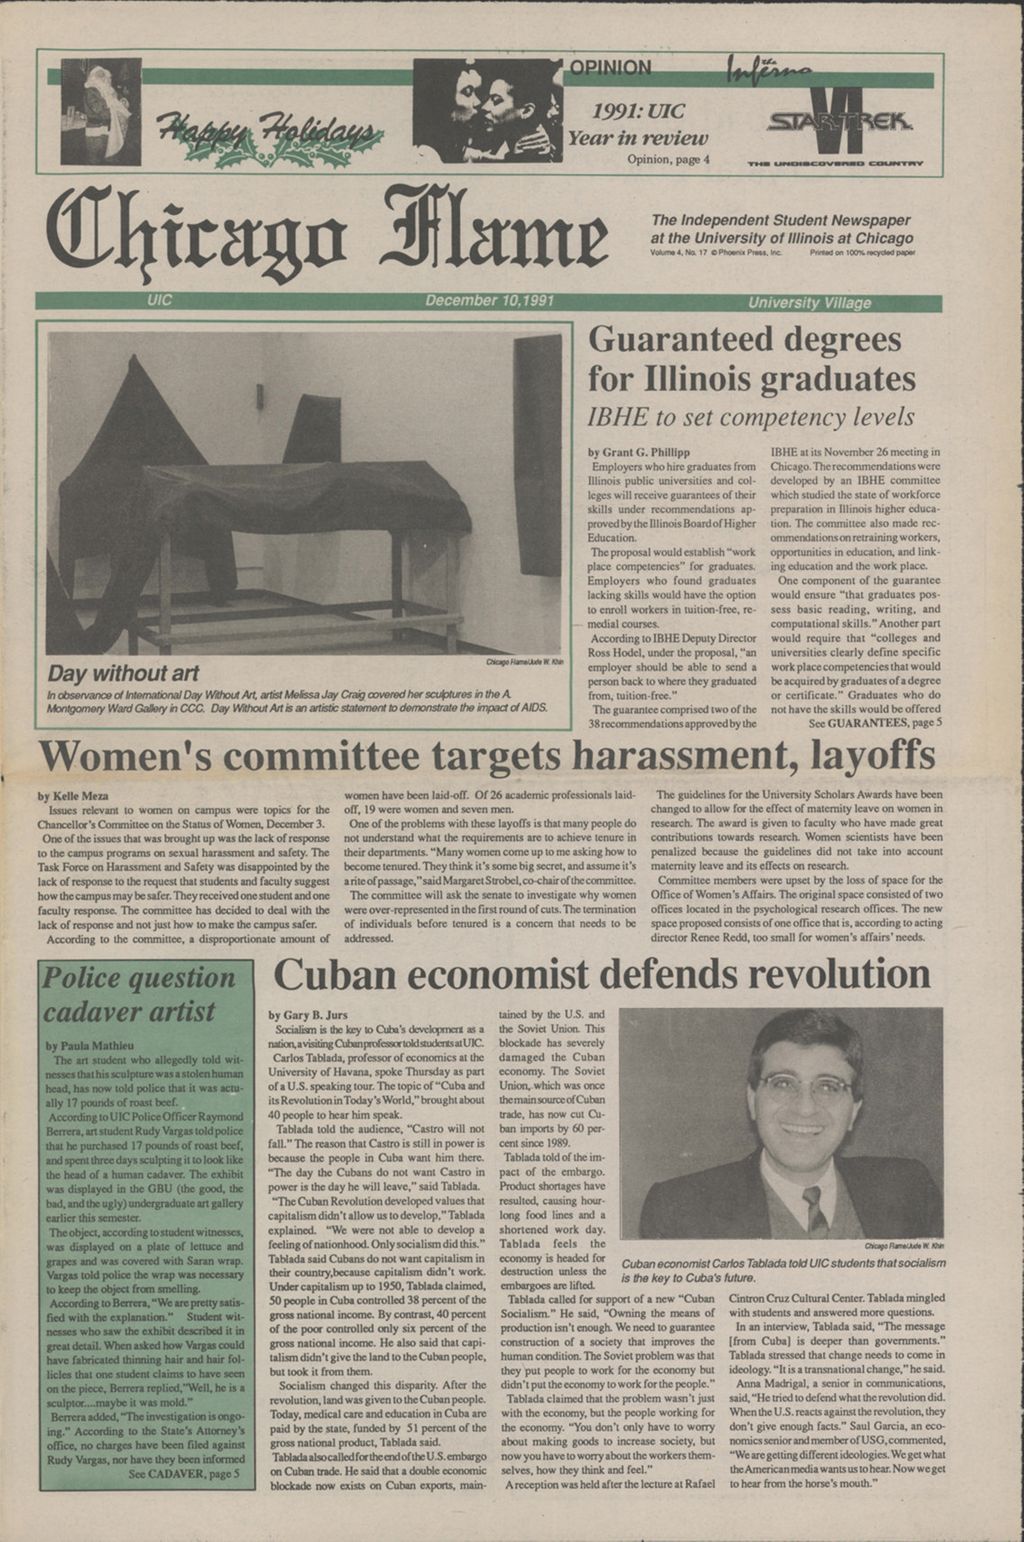 Miniature of Chicago Flame (December 10, 1991)